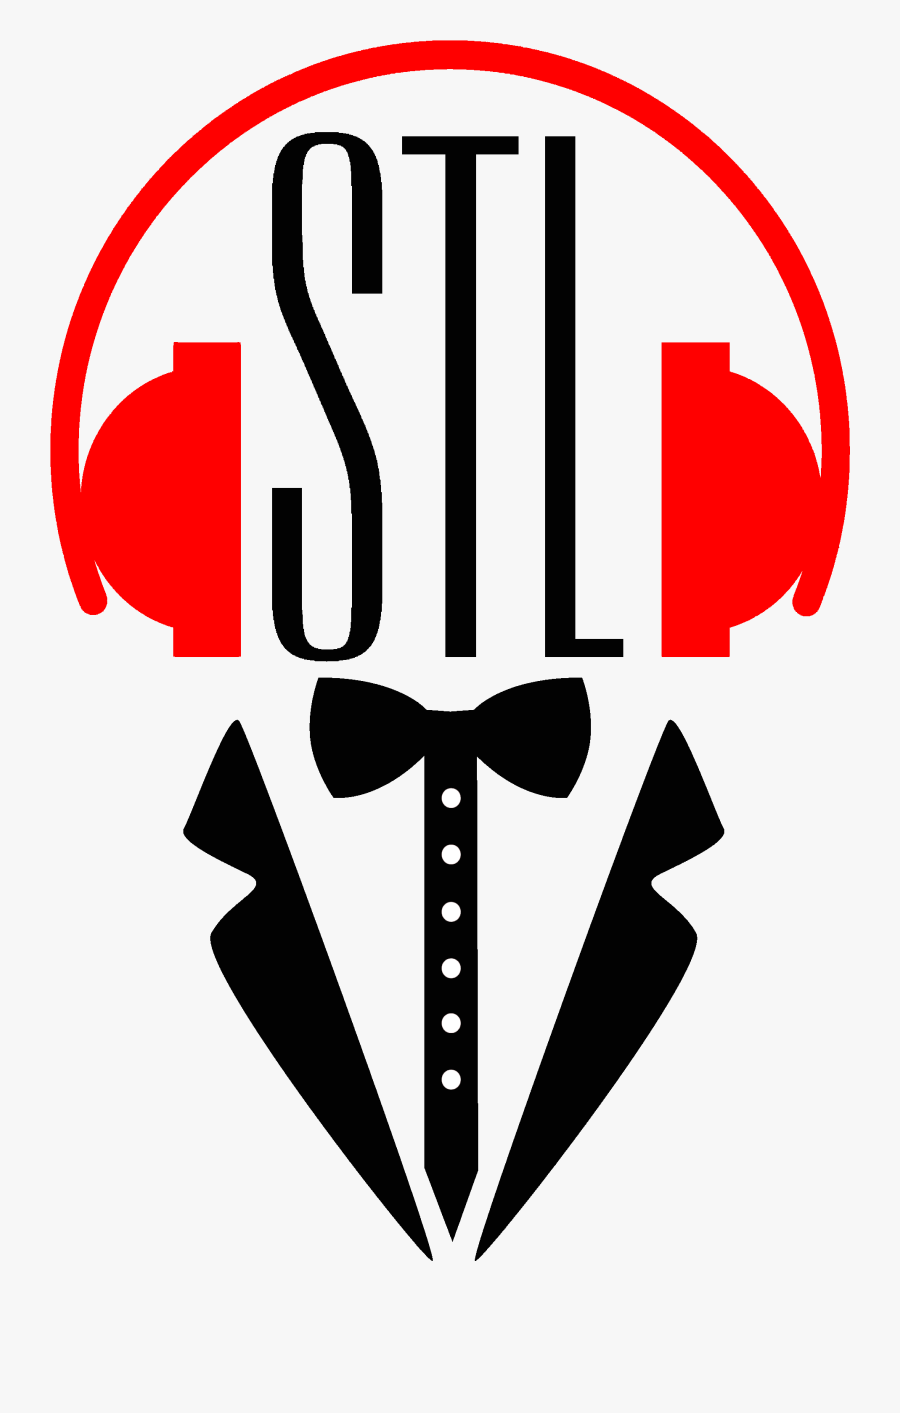 Skys The Limit Music And Entertainment - Deep House Music Icons, Transparent Clipart